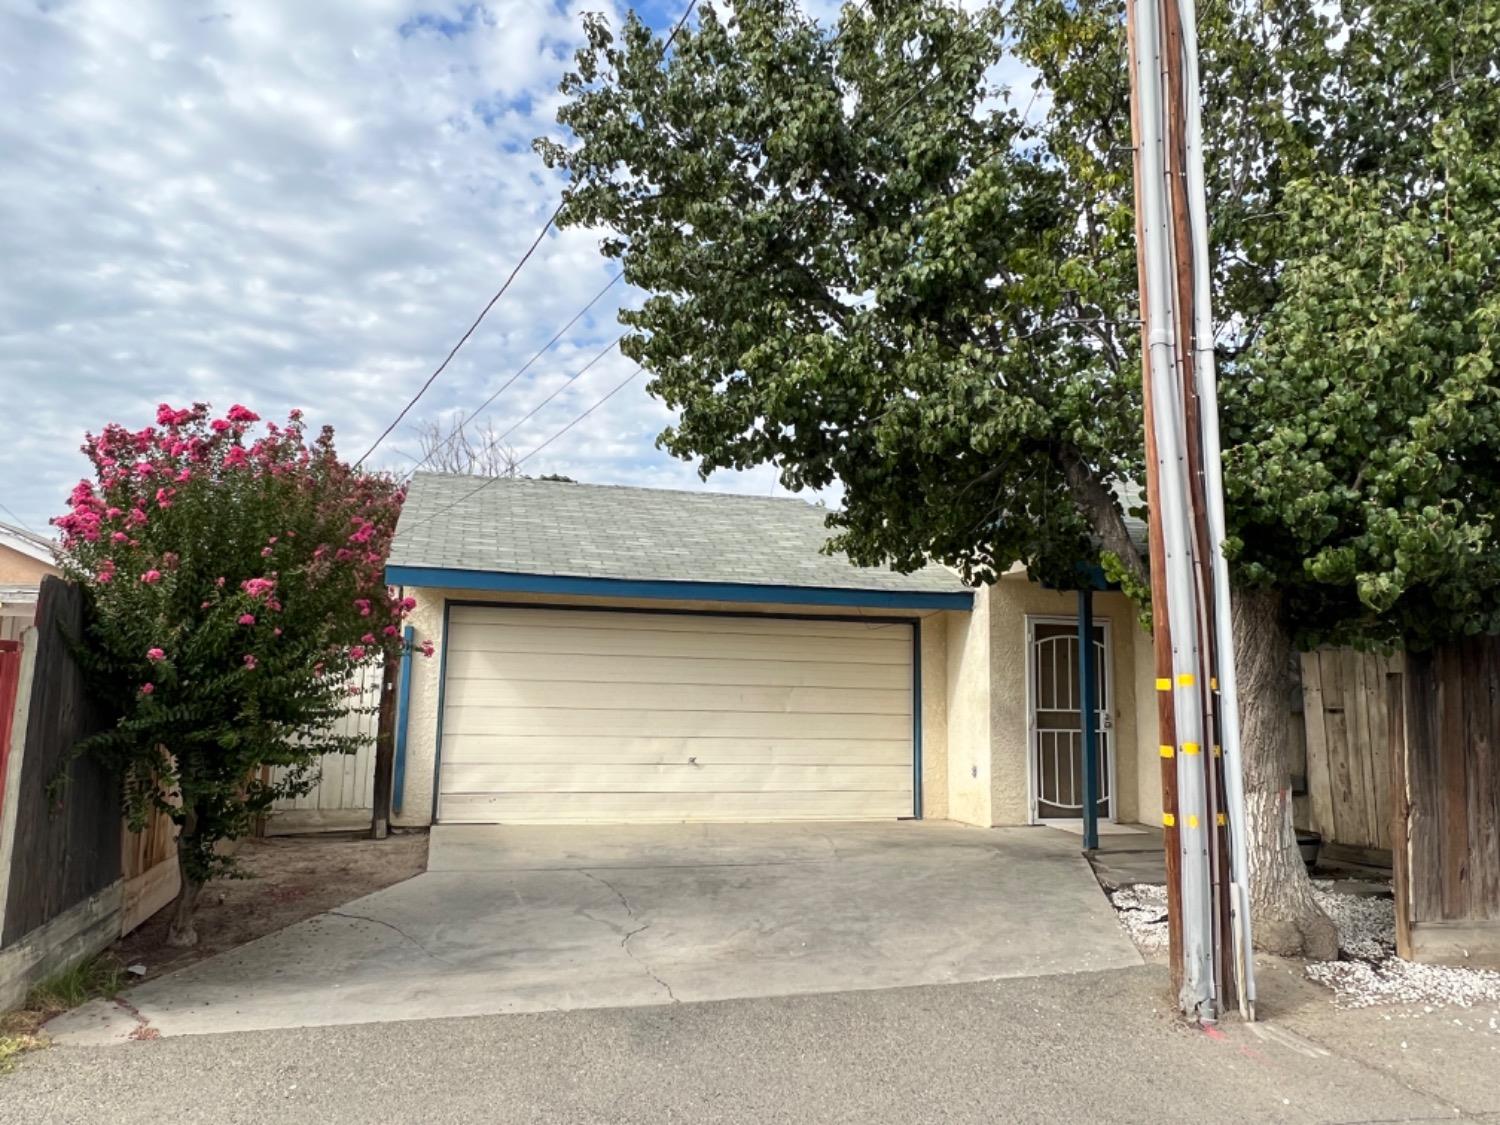 Photo of 1516 Tulare St #1/2 in Kingsburg, CA